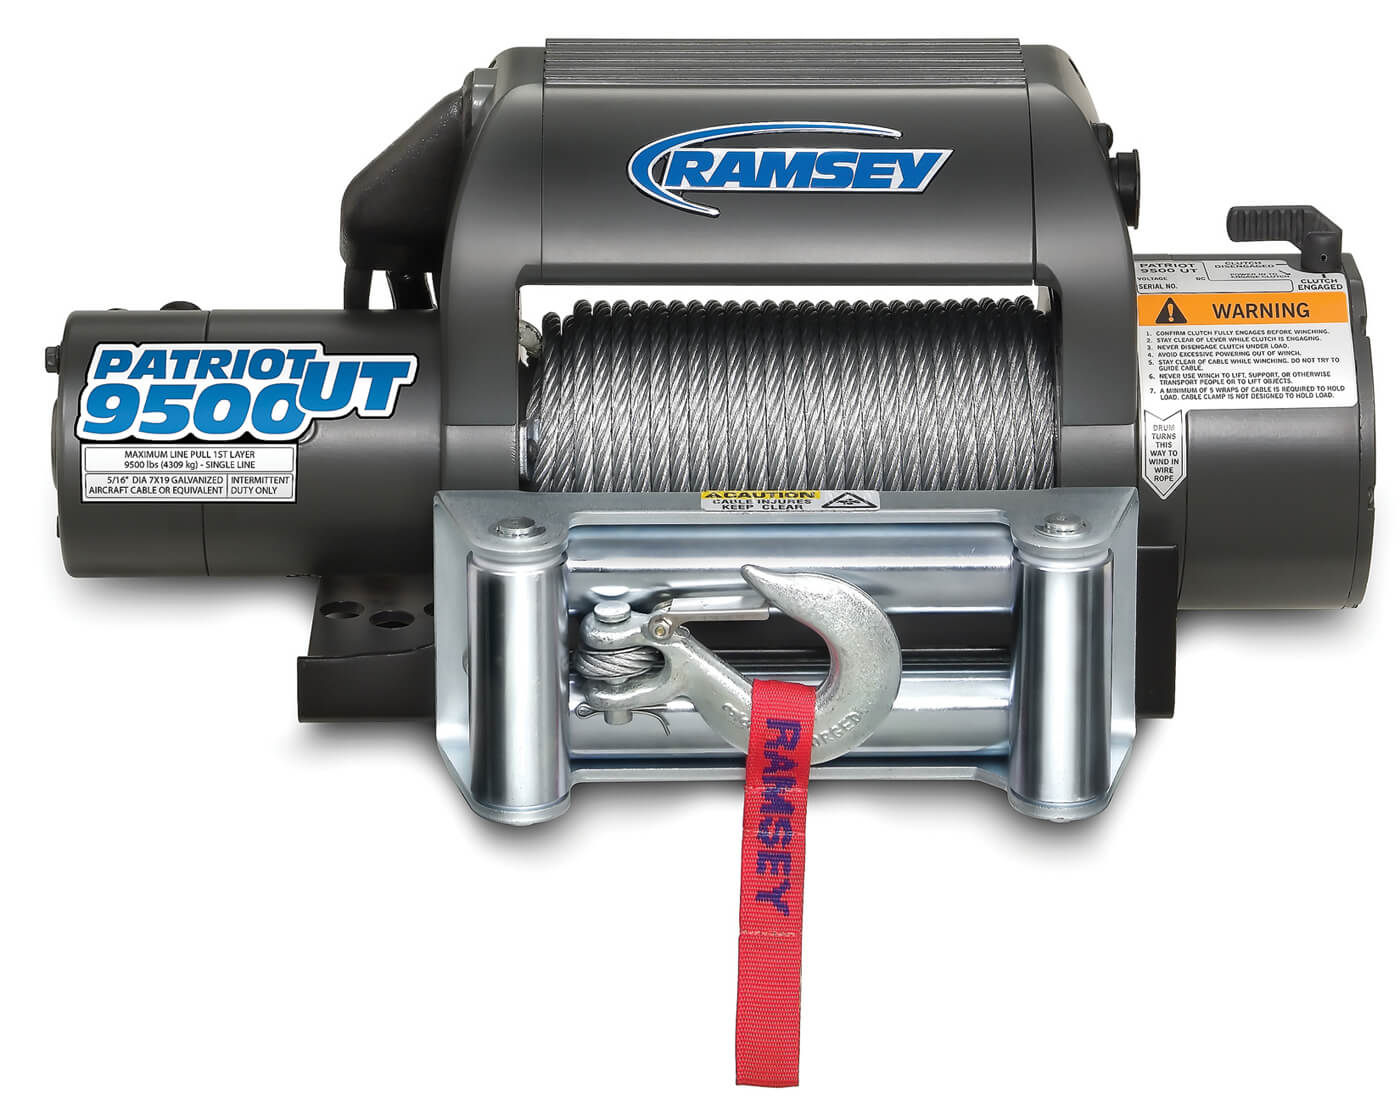 The Patriot 9500 UT is built rugged and strong with 9,500 pounds of line pu...